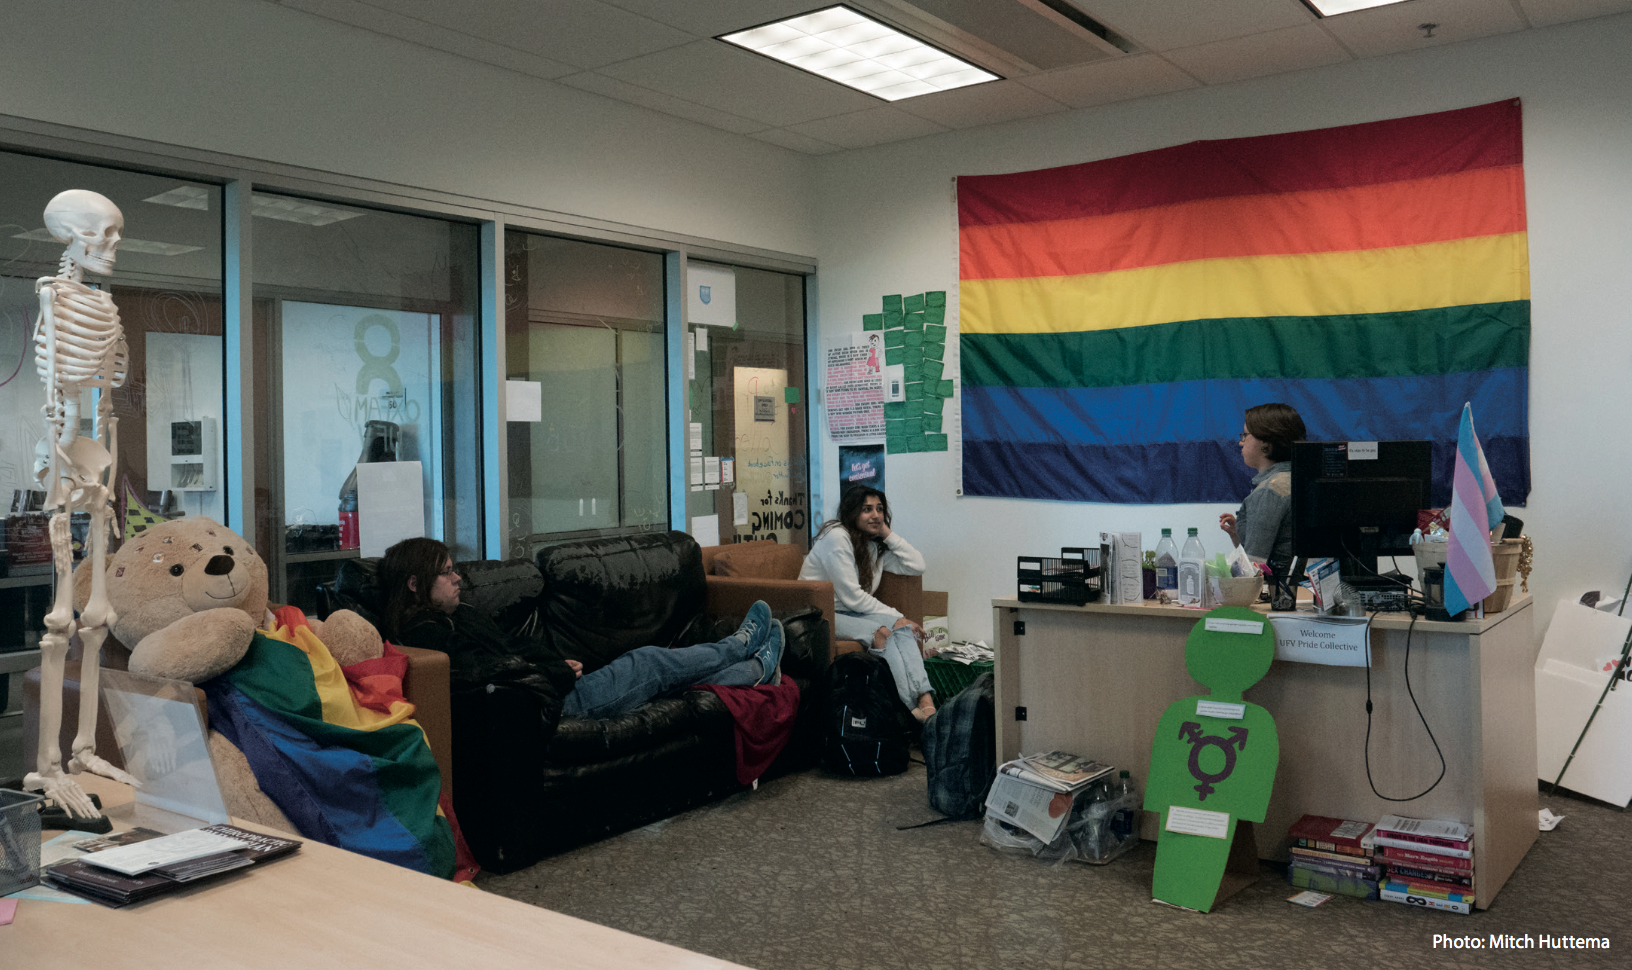 New student groups move into SUB office rooms